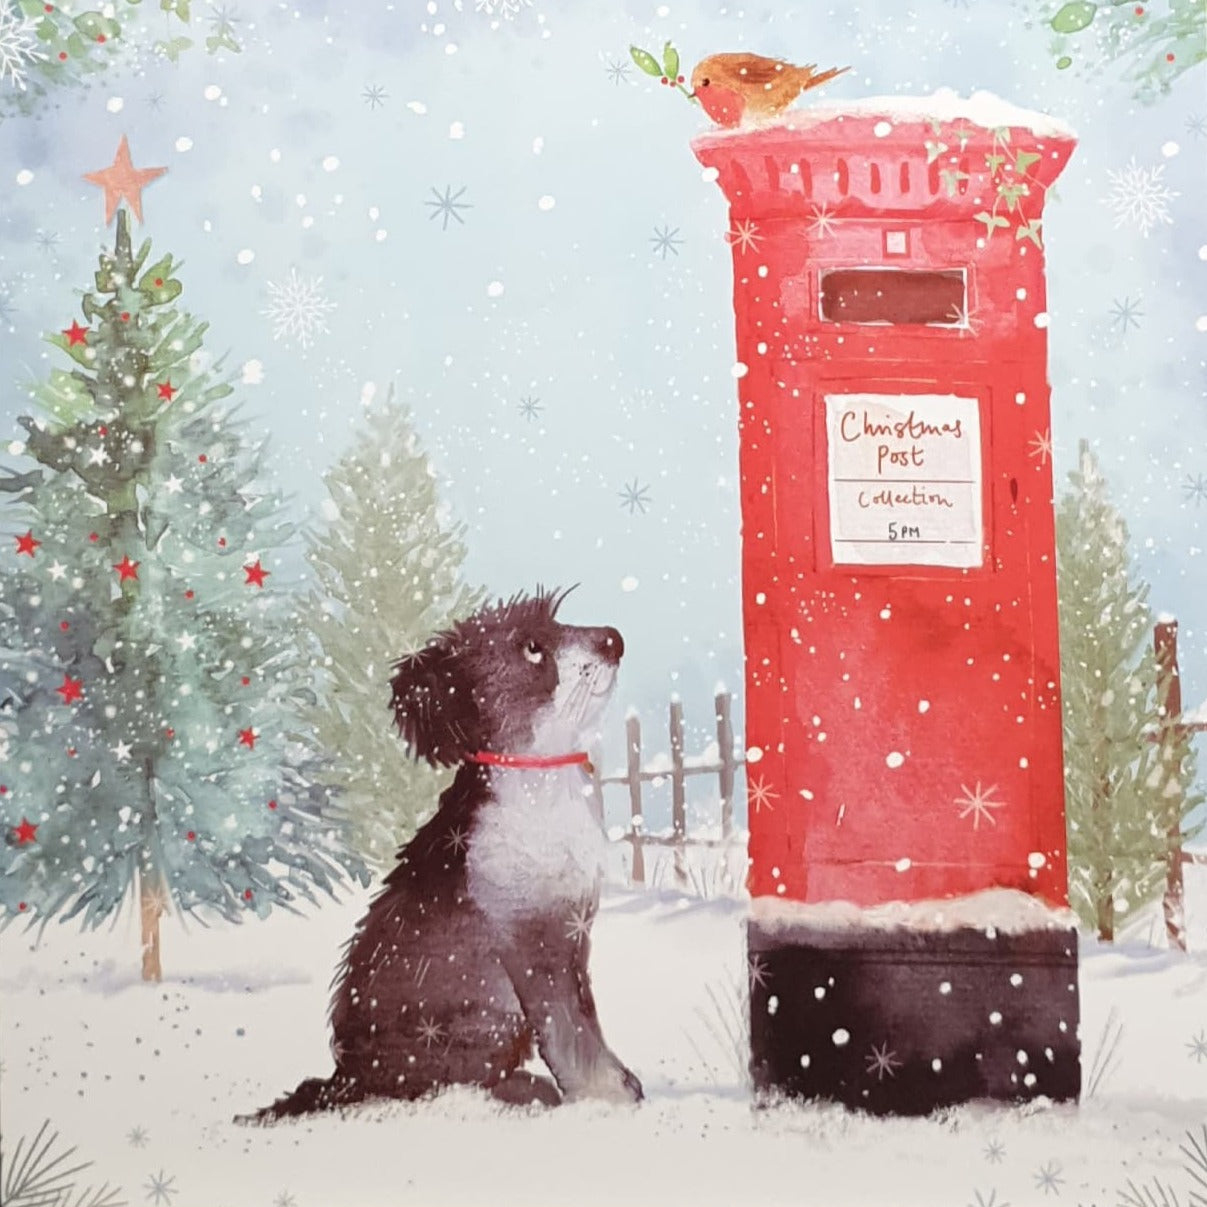 Charity Christmas Card - Pack of 8 Large Size / Northern Ireland Hospice - Dog Looking at Post Box